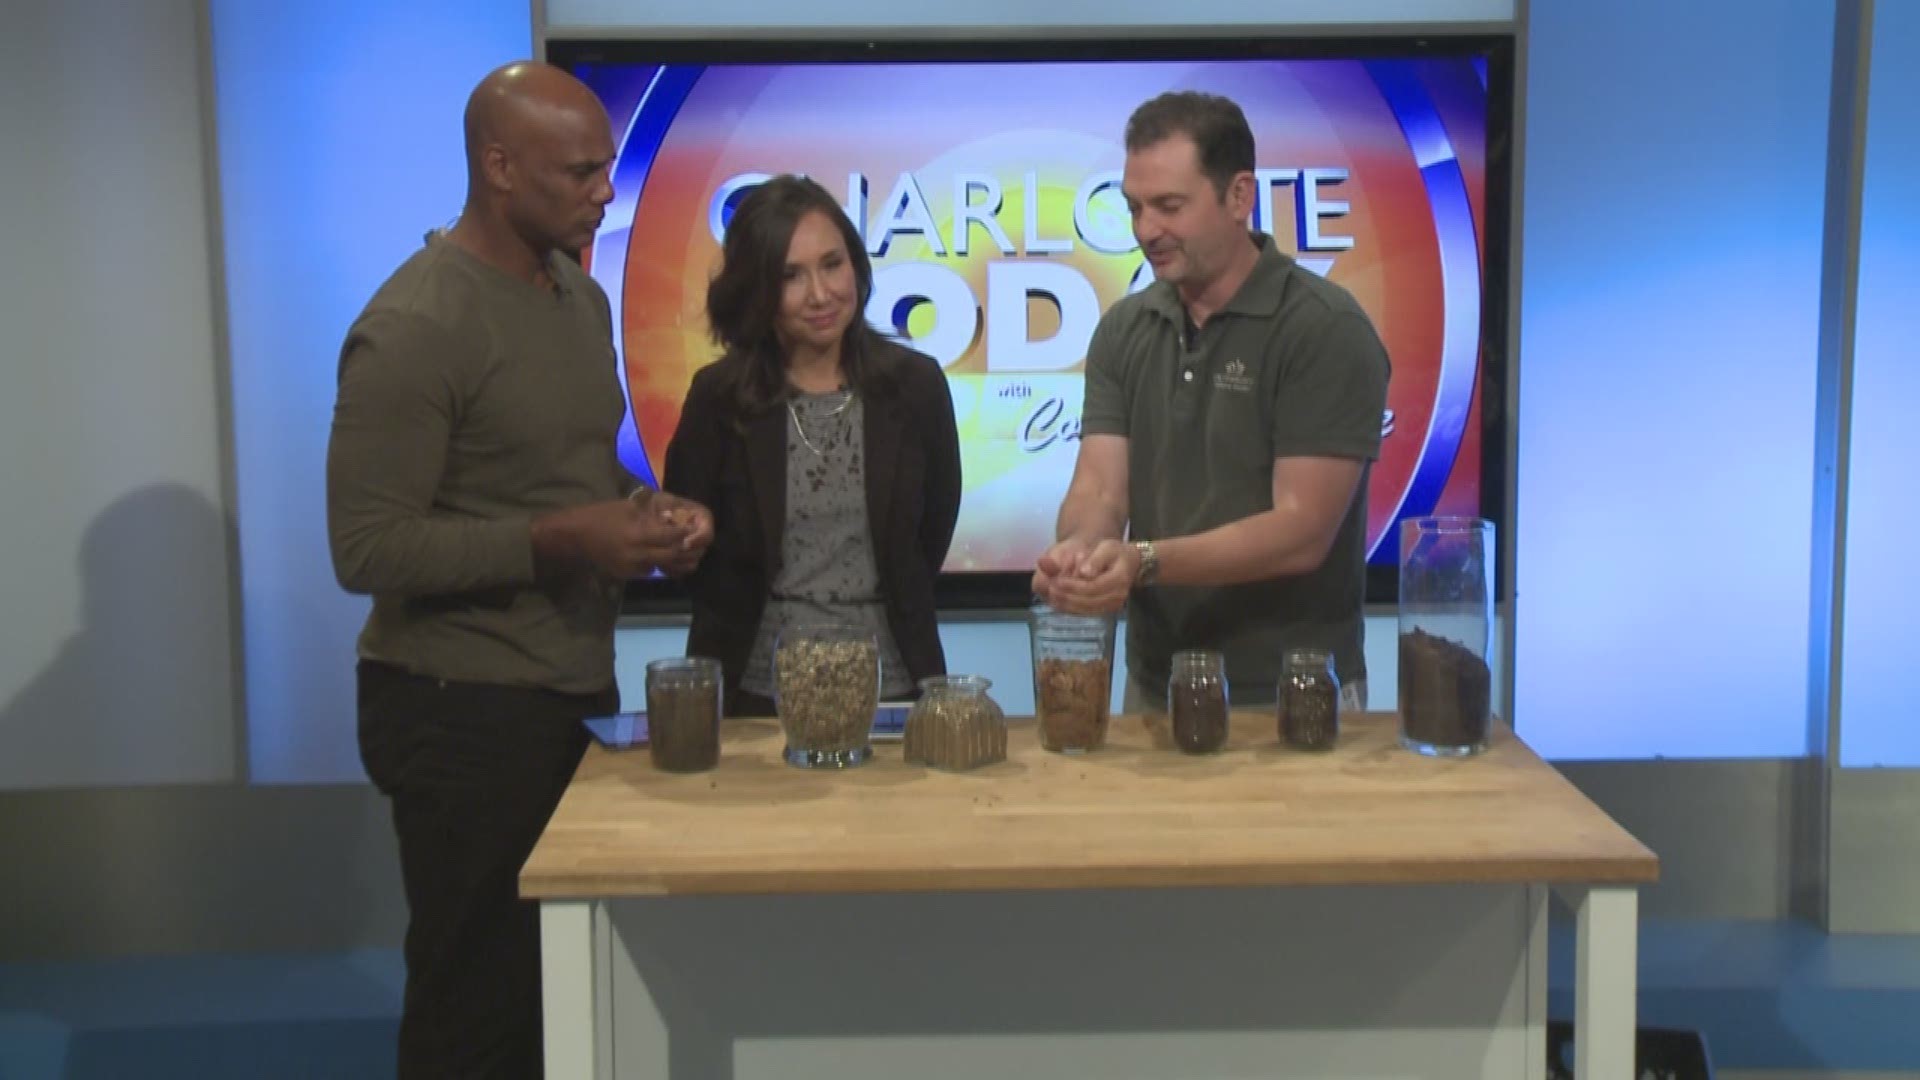 Jeff Gilman from the UNC Charlotte Botanical garden has some tips for you